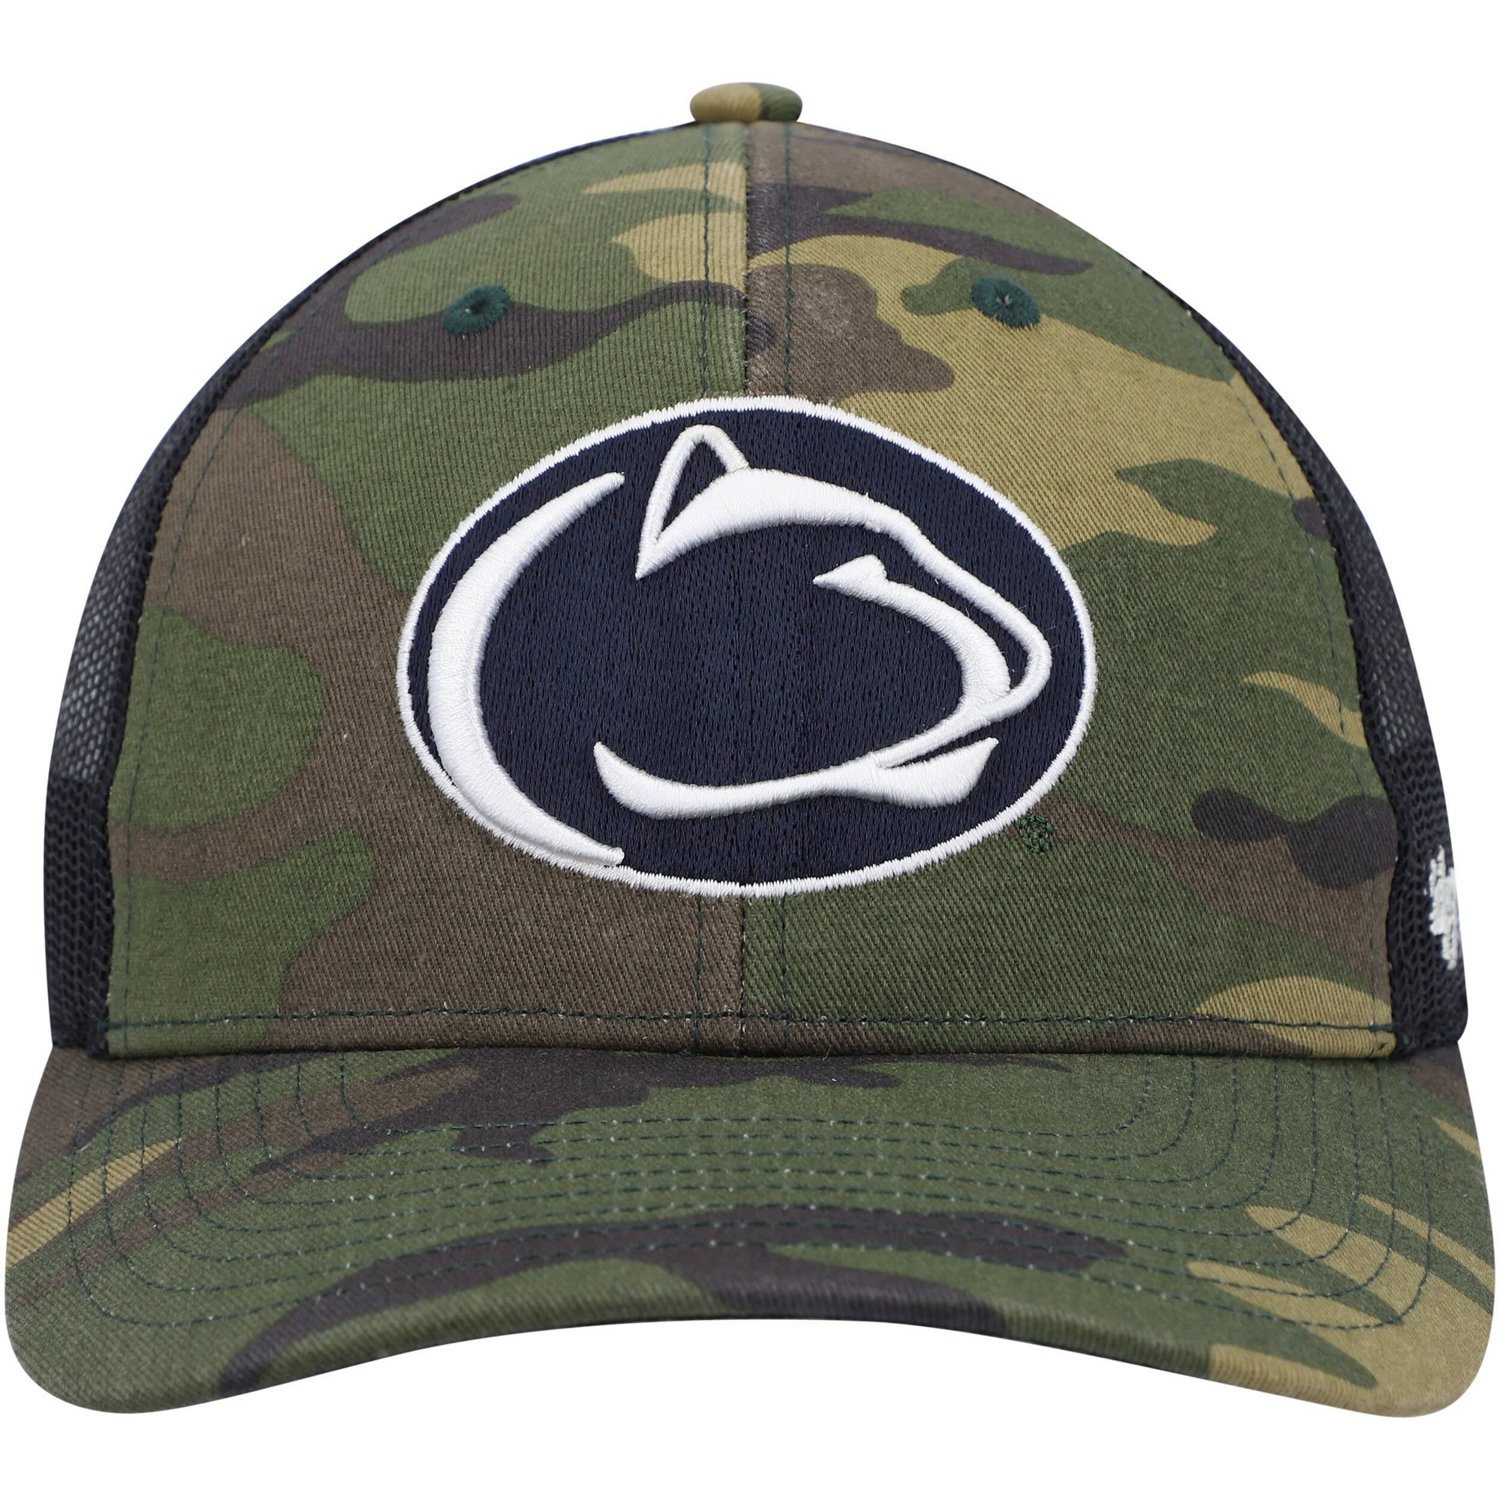 Penn State Nittany Lions Hats in Penn State Nittany Lions Team